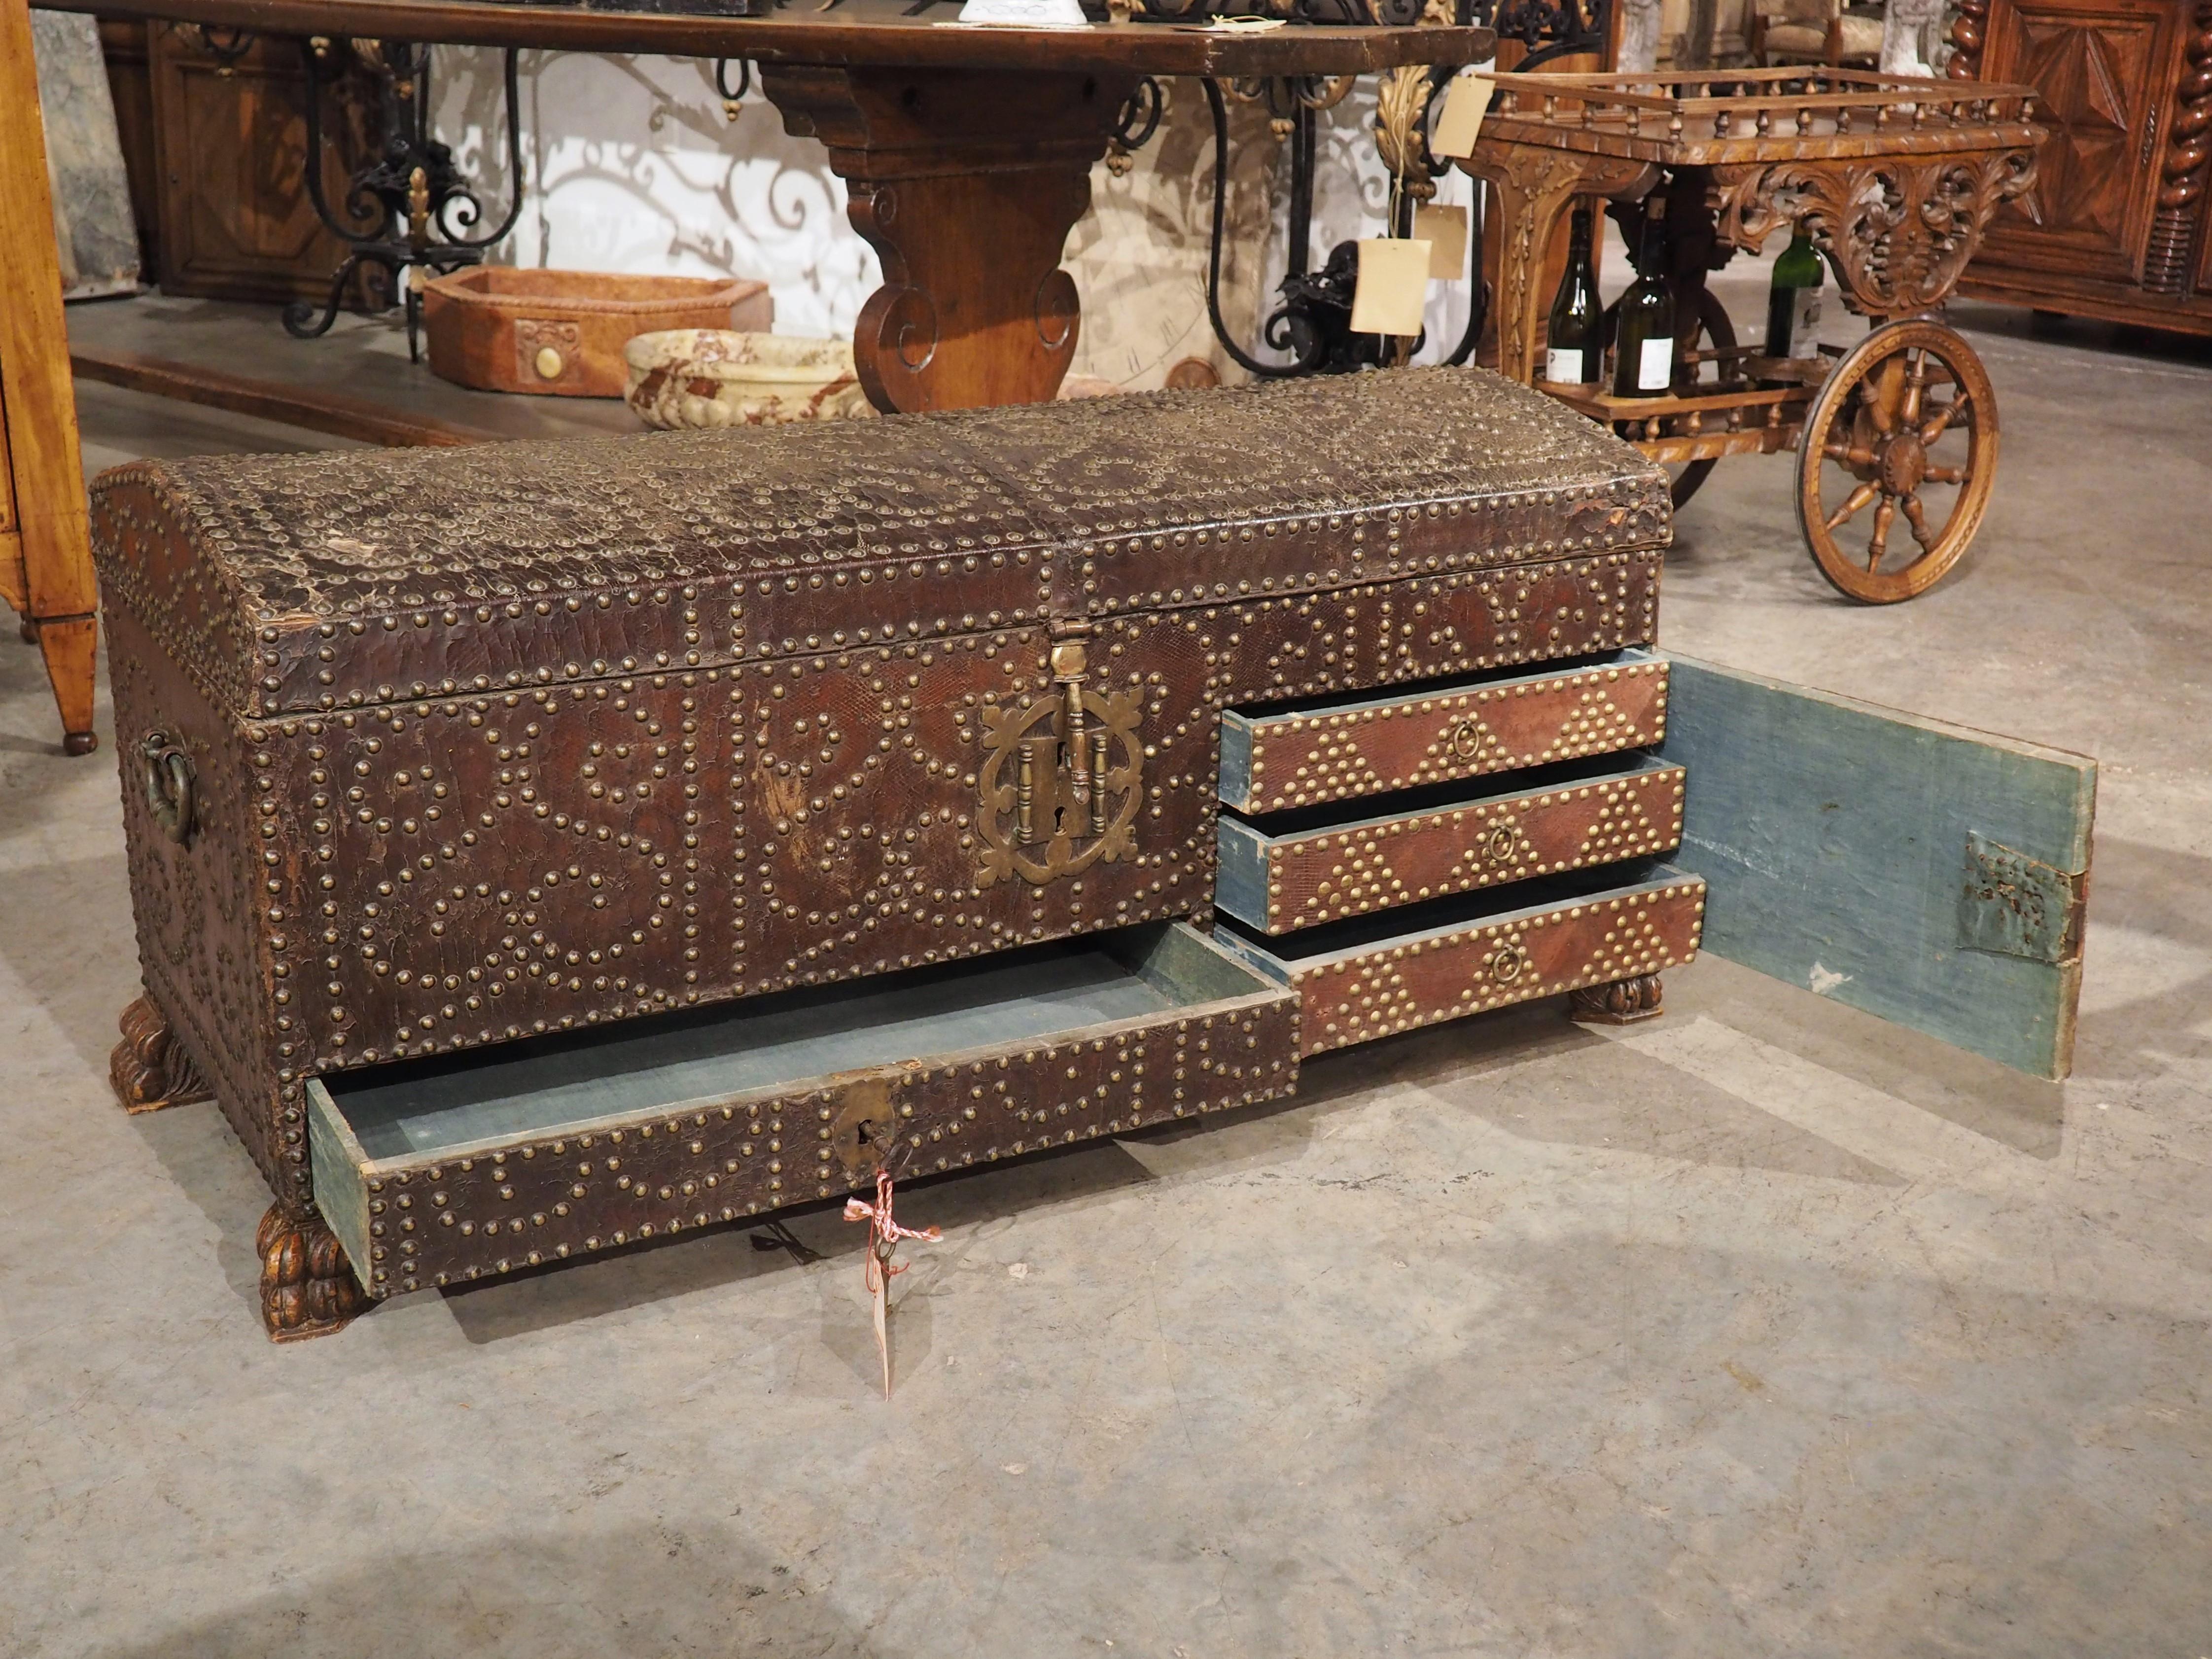 18th Century Spanish Studded Leather Trunk with Lockable Compartments For Sale 14